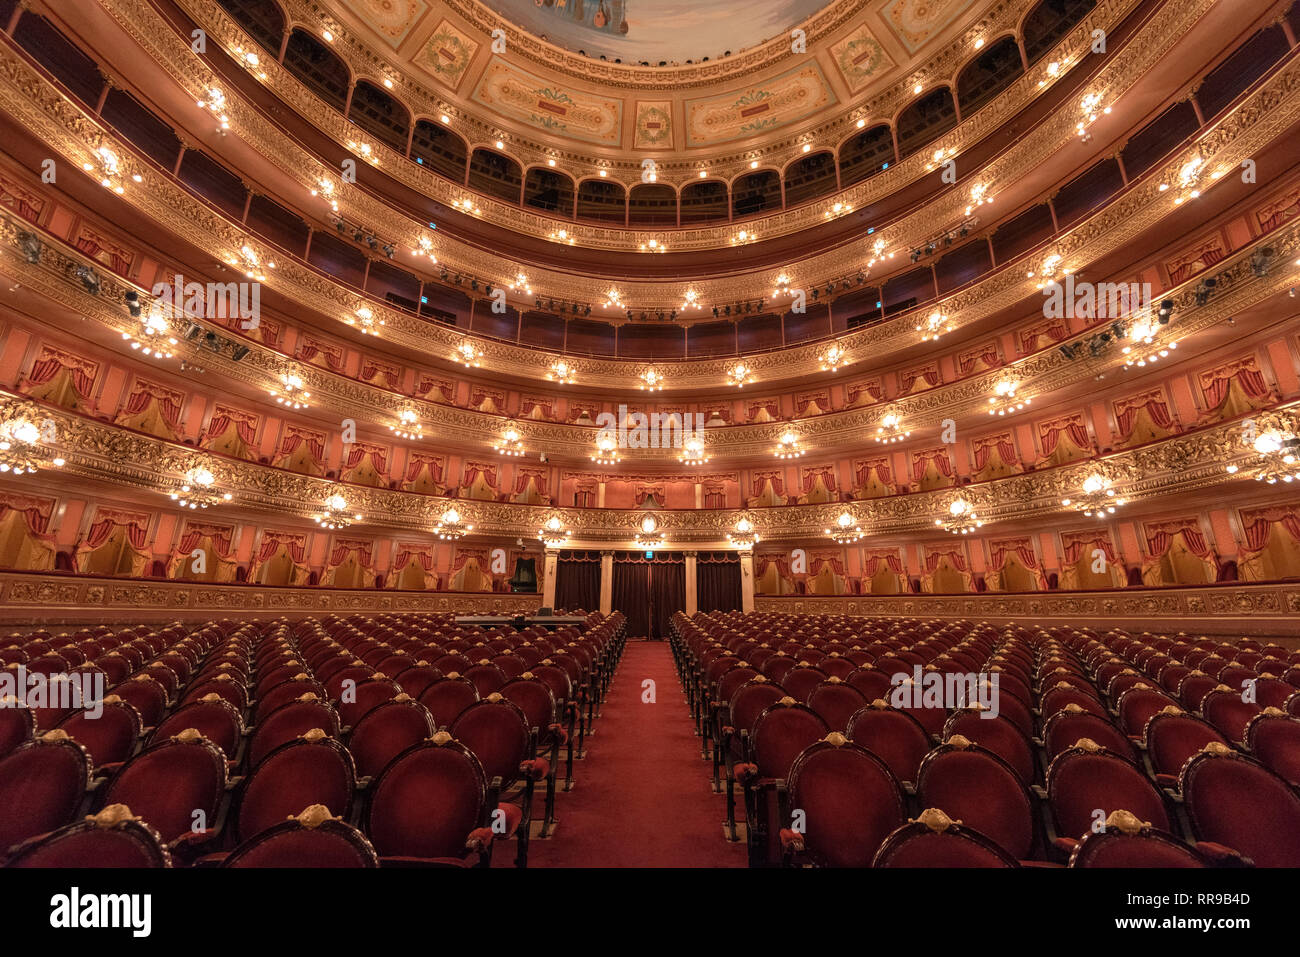 The interior of Teatro Colon in Buenos Aires, pictured from near the stage looking back towards the audience. Stock Photo